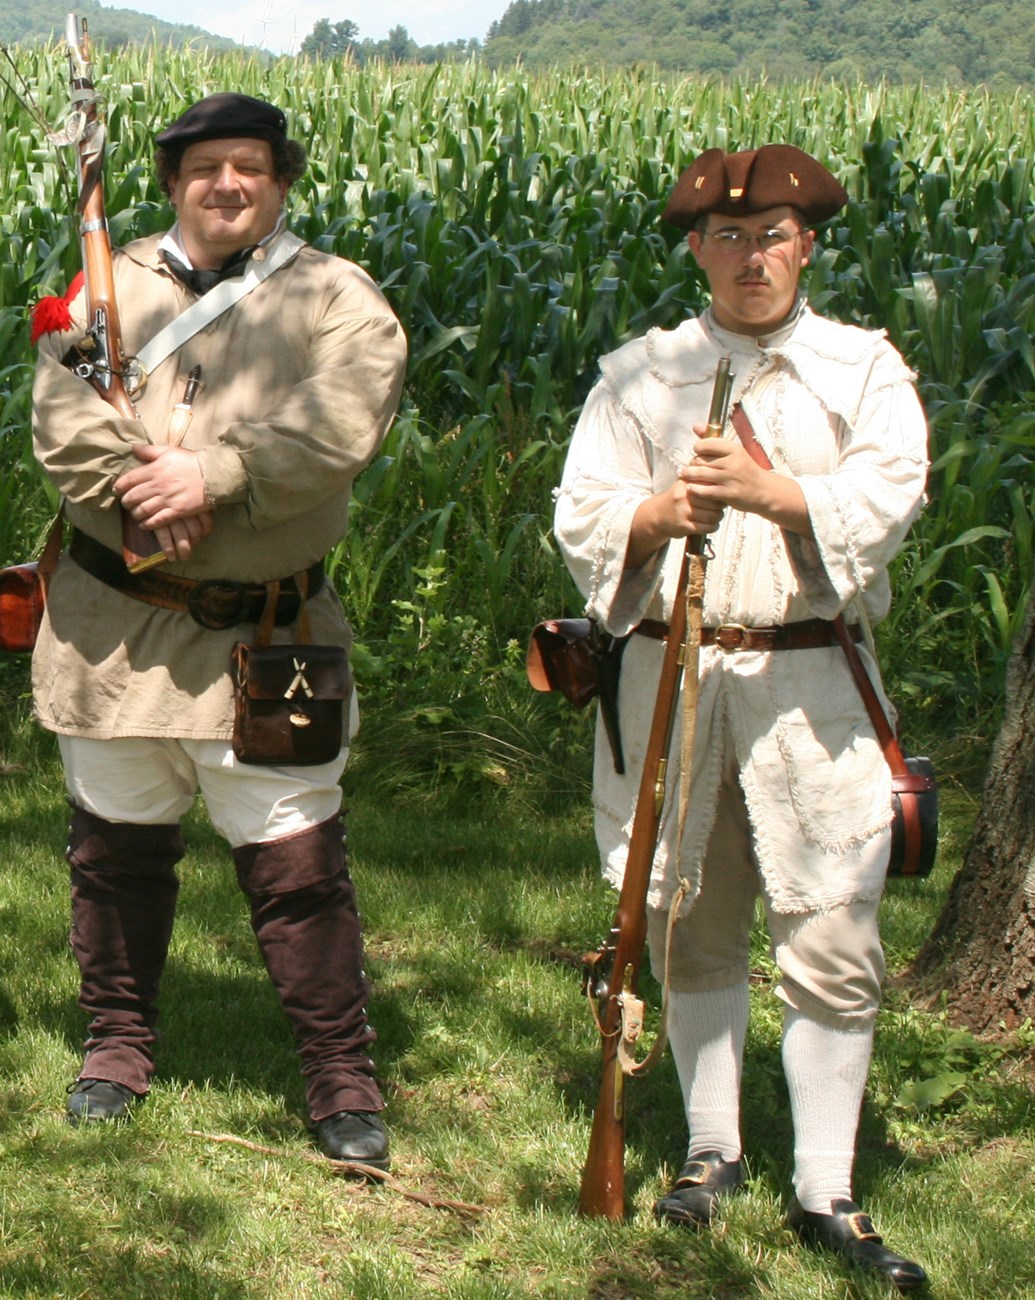 2 people in Continental Soldier uniforms stand with muskets ready under green trees.